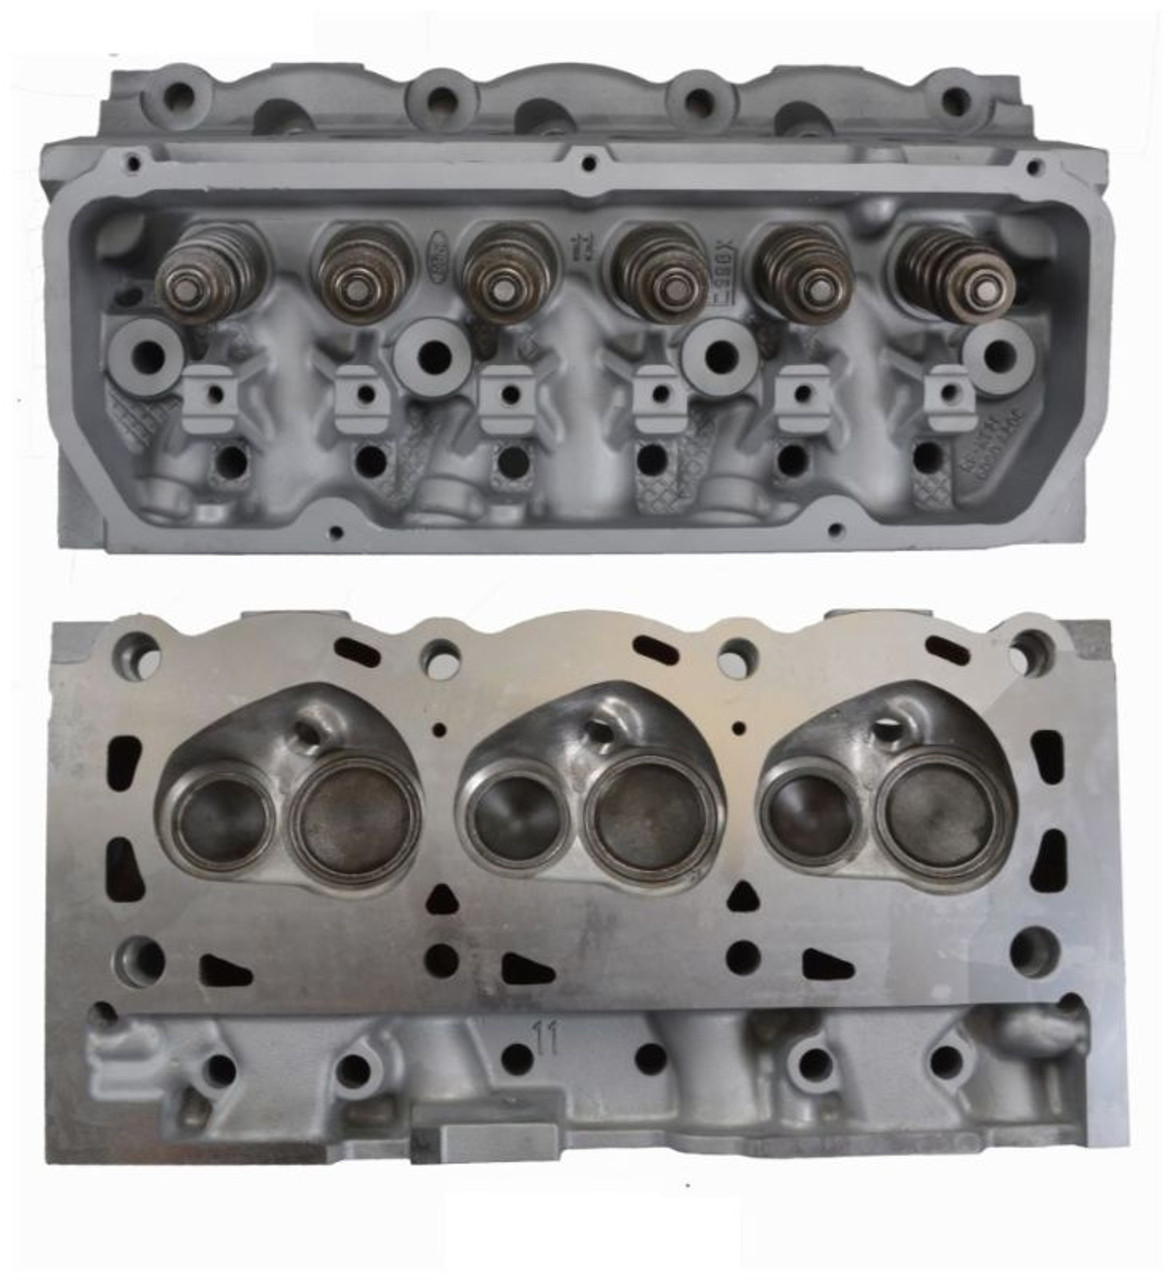 Cylinder Head Assembly - 1999 Ford E-150 Econoline 4.2L (CH1035R.A1)